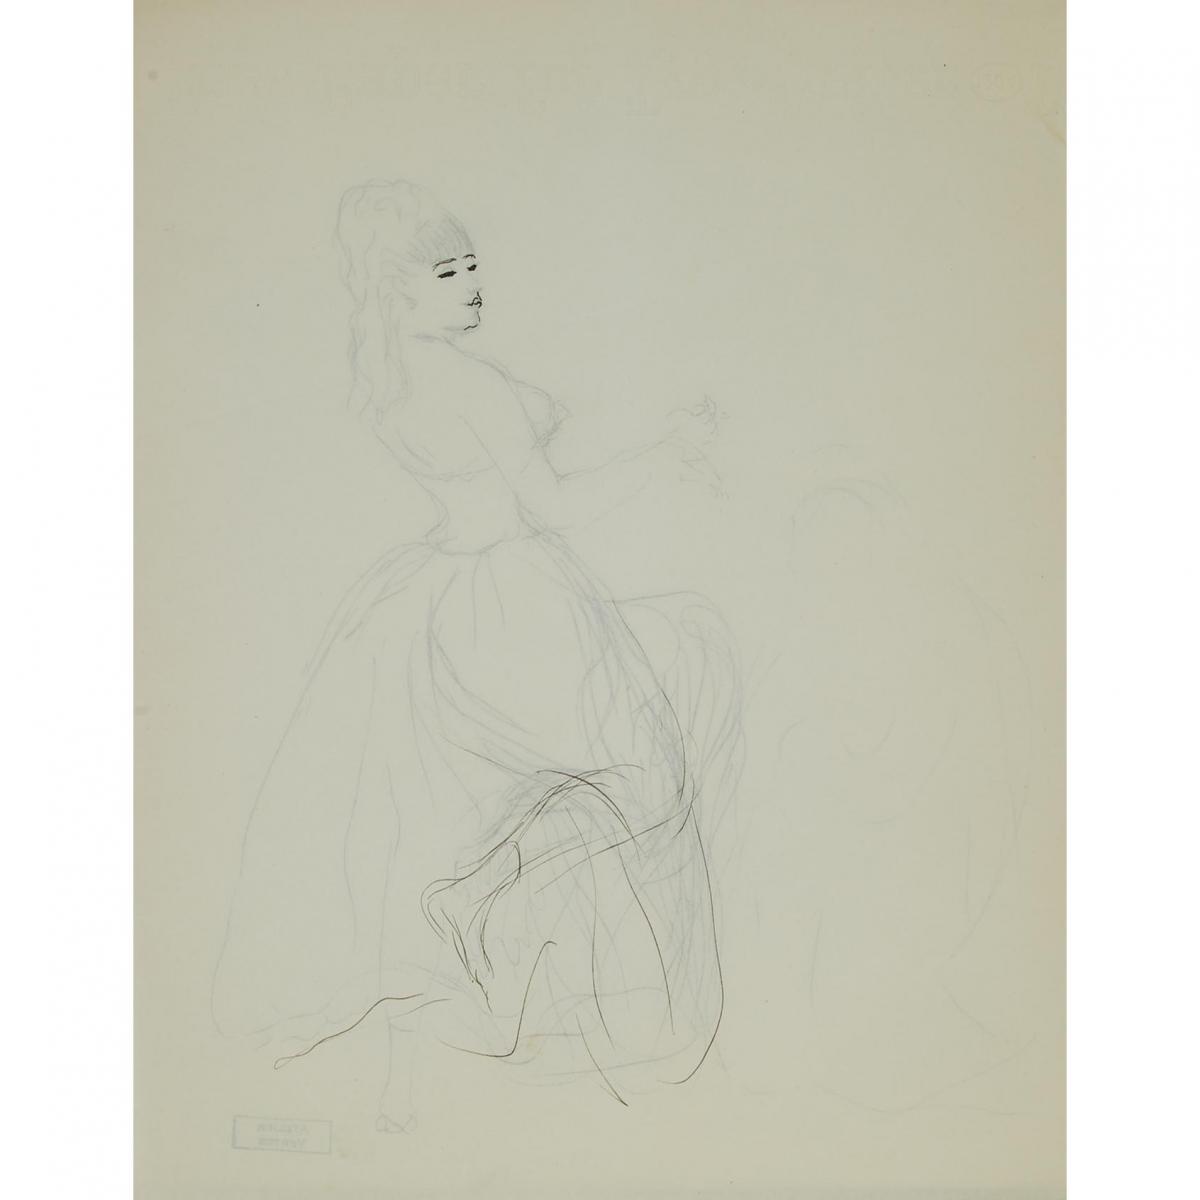 Various Artists, COLLECTION OF DRAWINGS, SOME 1956, Auguste François (Marie) Gorguet (1862-1927), Fr - Image 8 of 17